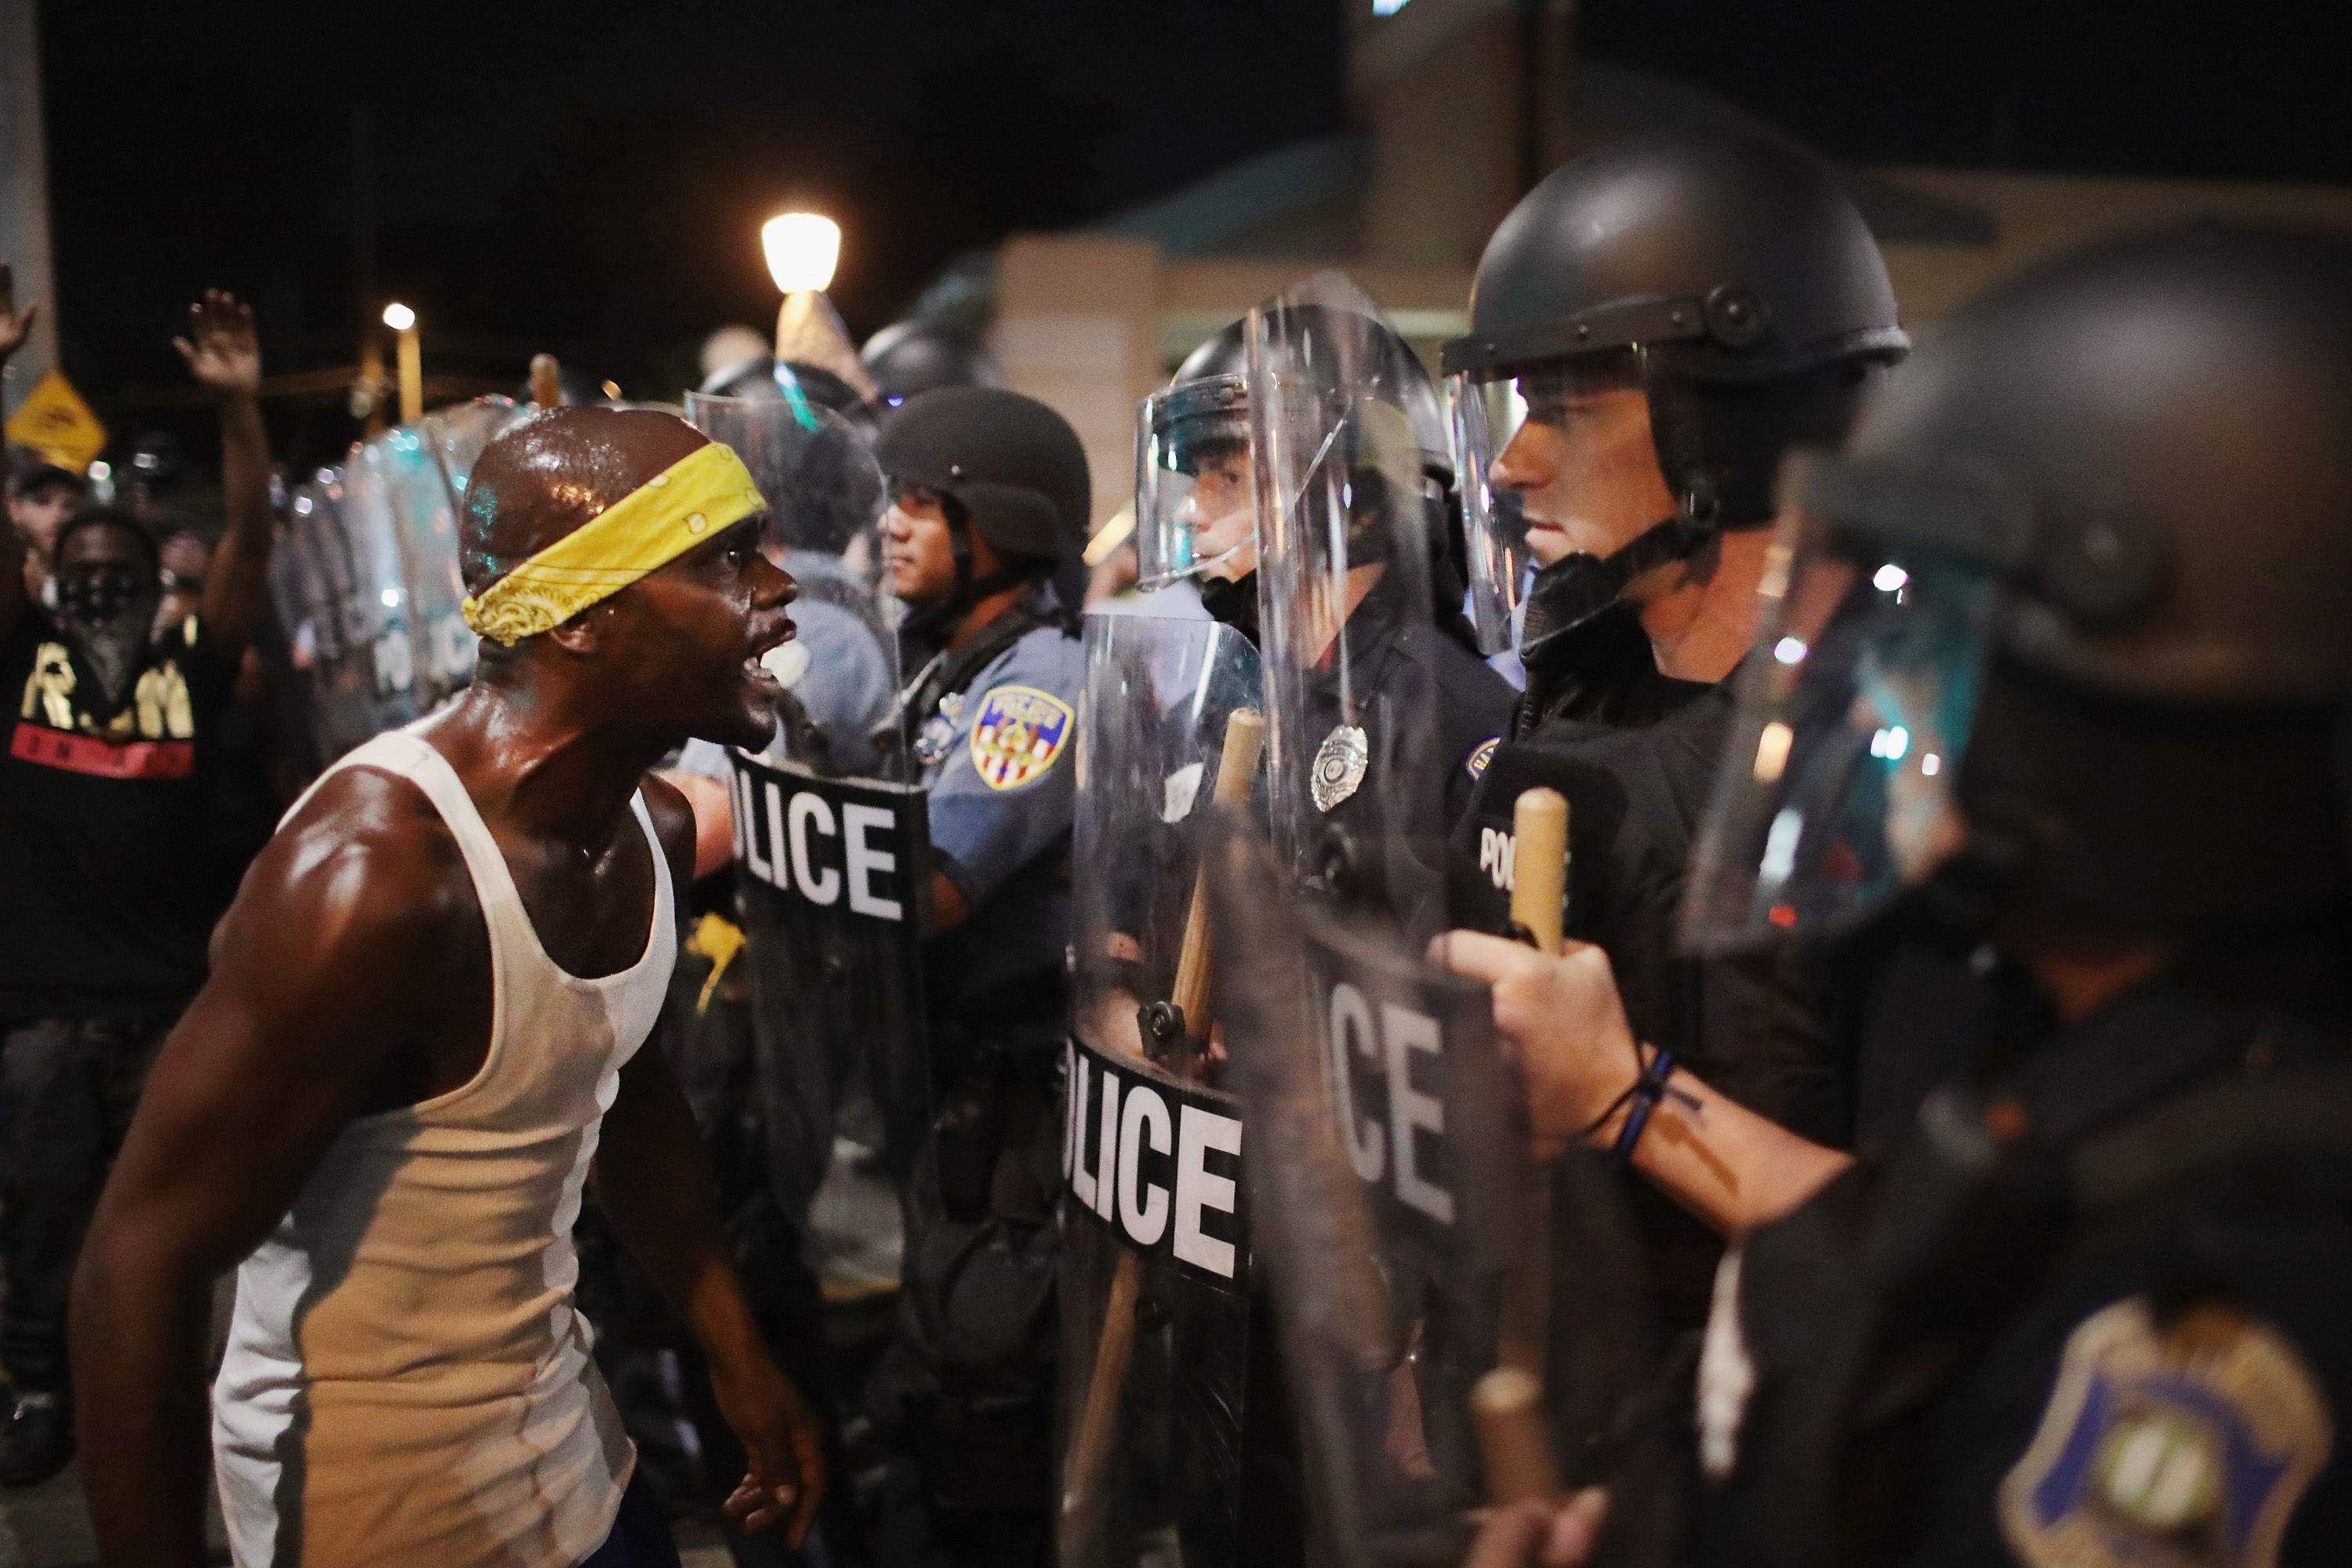 Protesters clash with police during marches in St. Louis